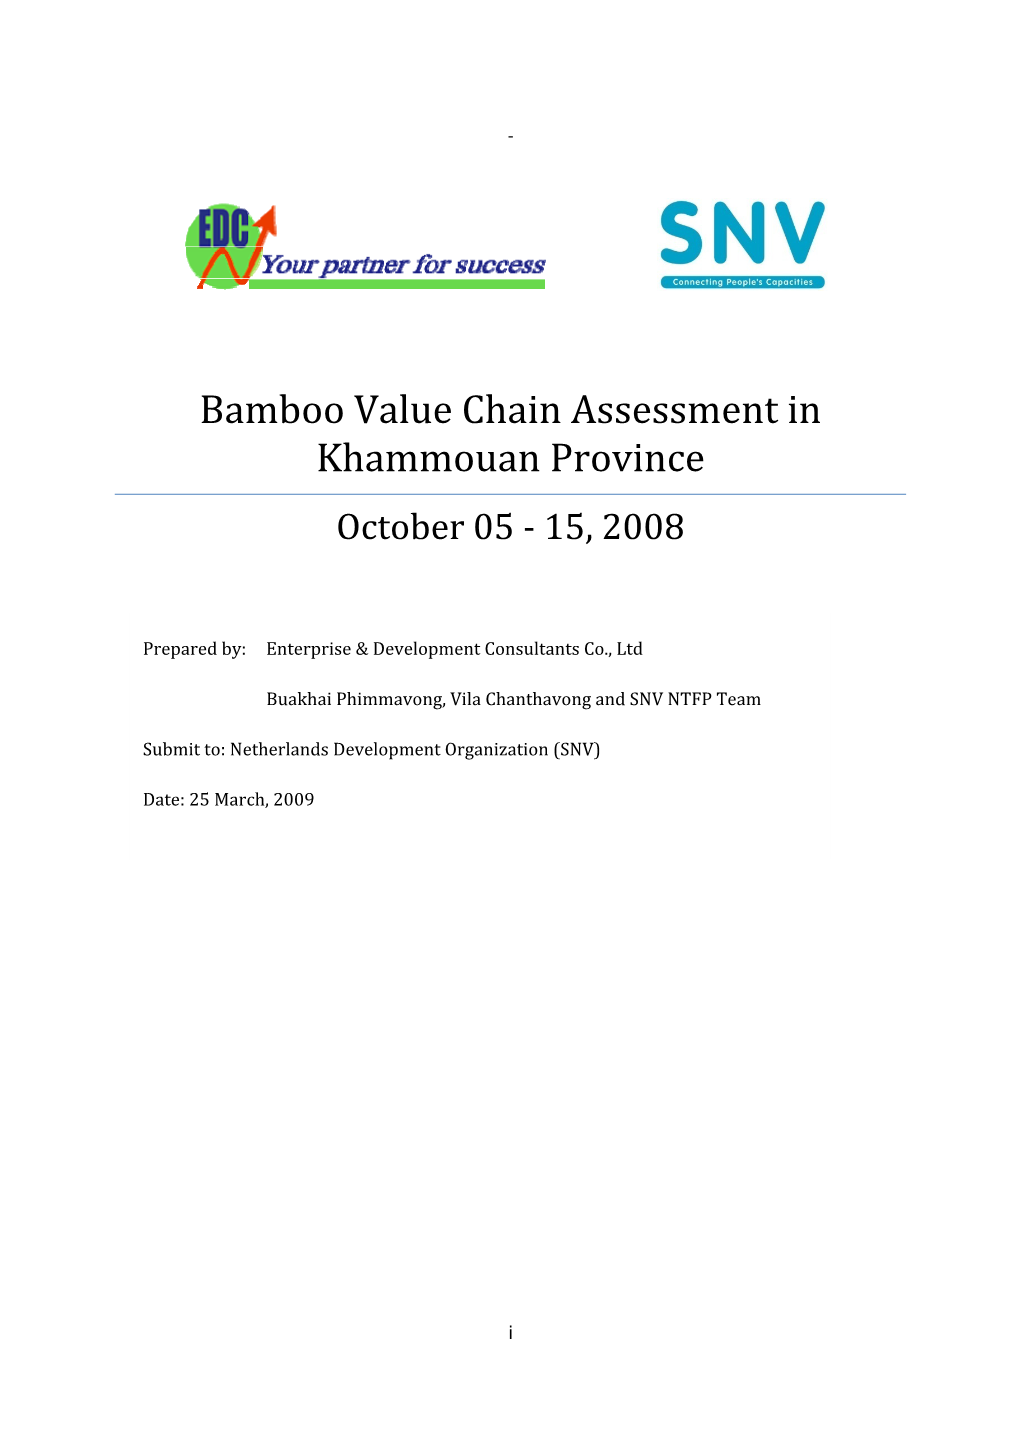 Bamboo Value Chain Assessment in Khammouan Province October 05 ‐ 15, 2008